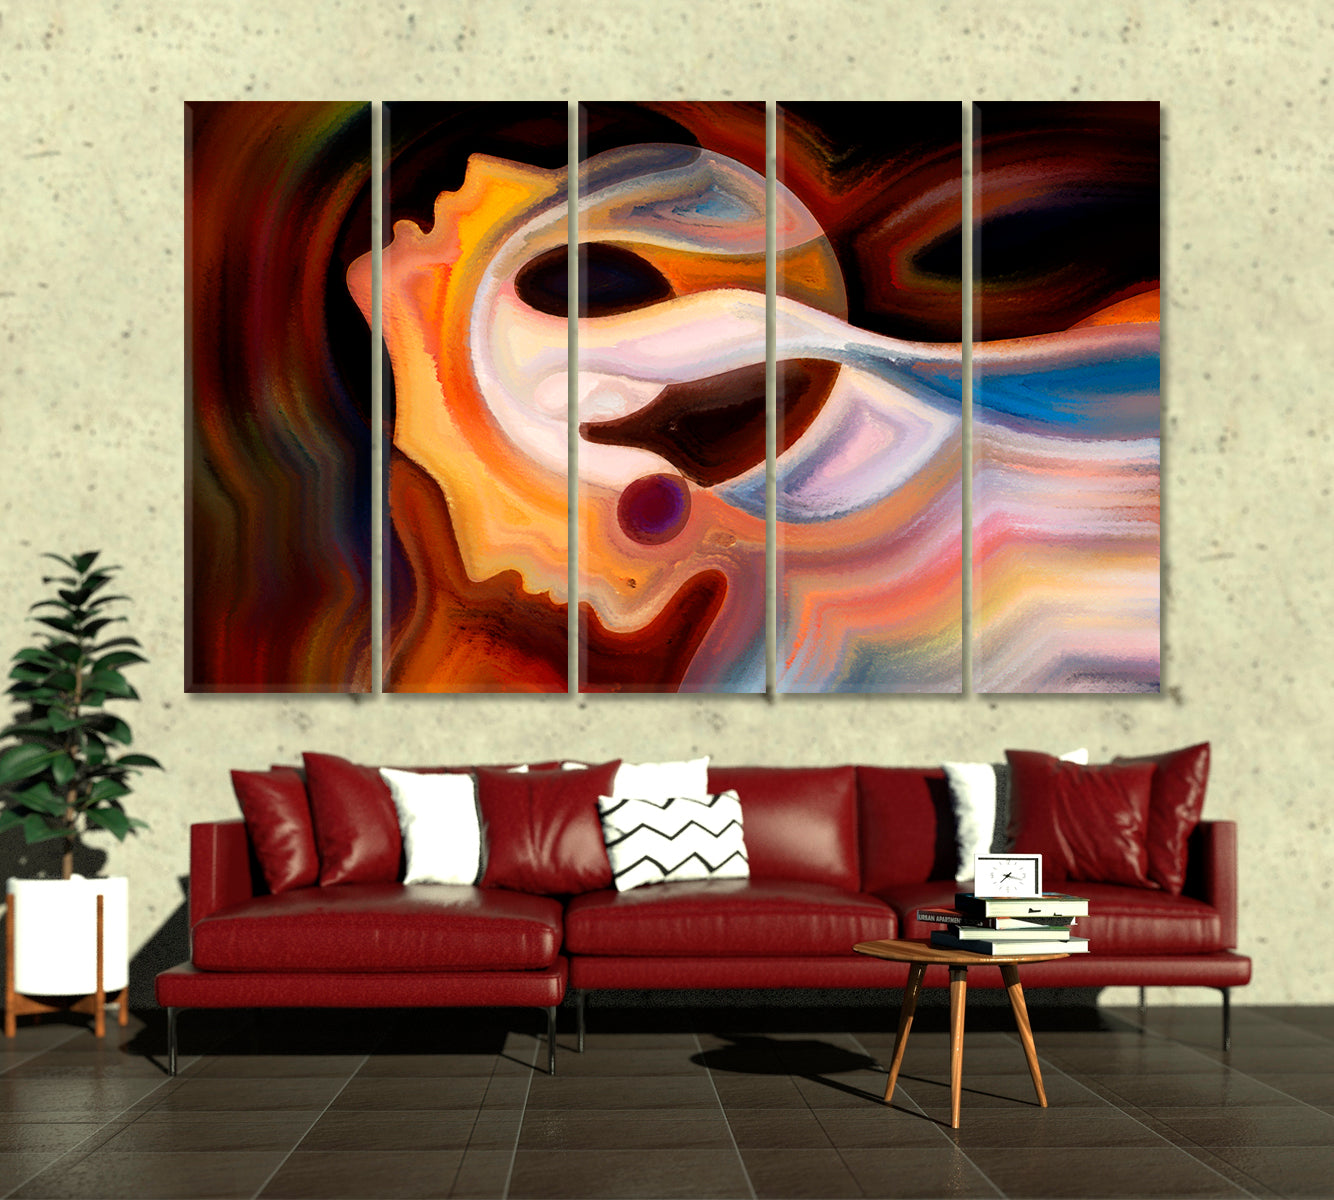 Fortune Colors Beautiful Abstraction Consciousness Art Artesty 5 panels 36" x 24" 